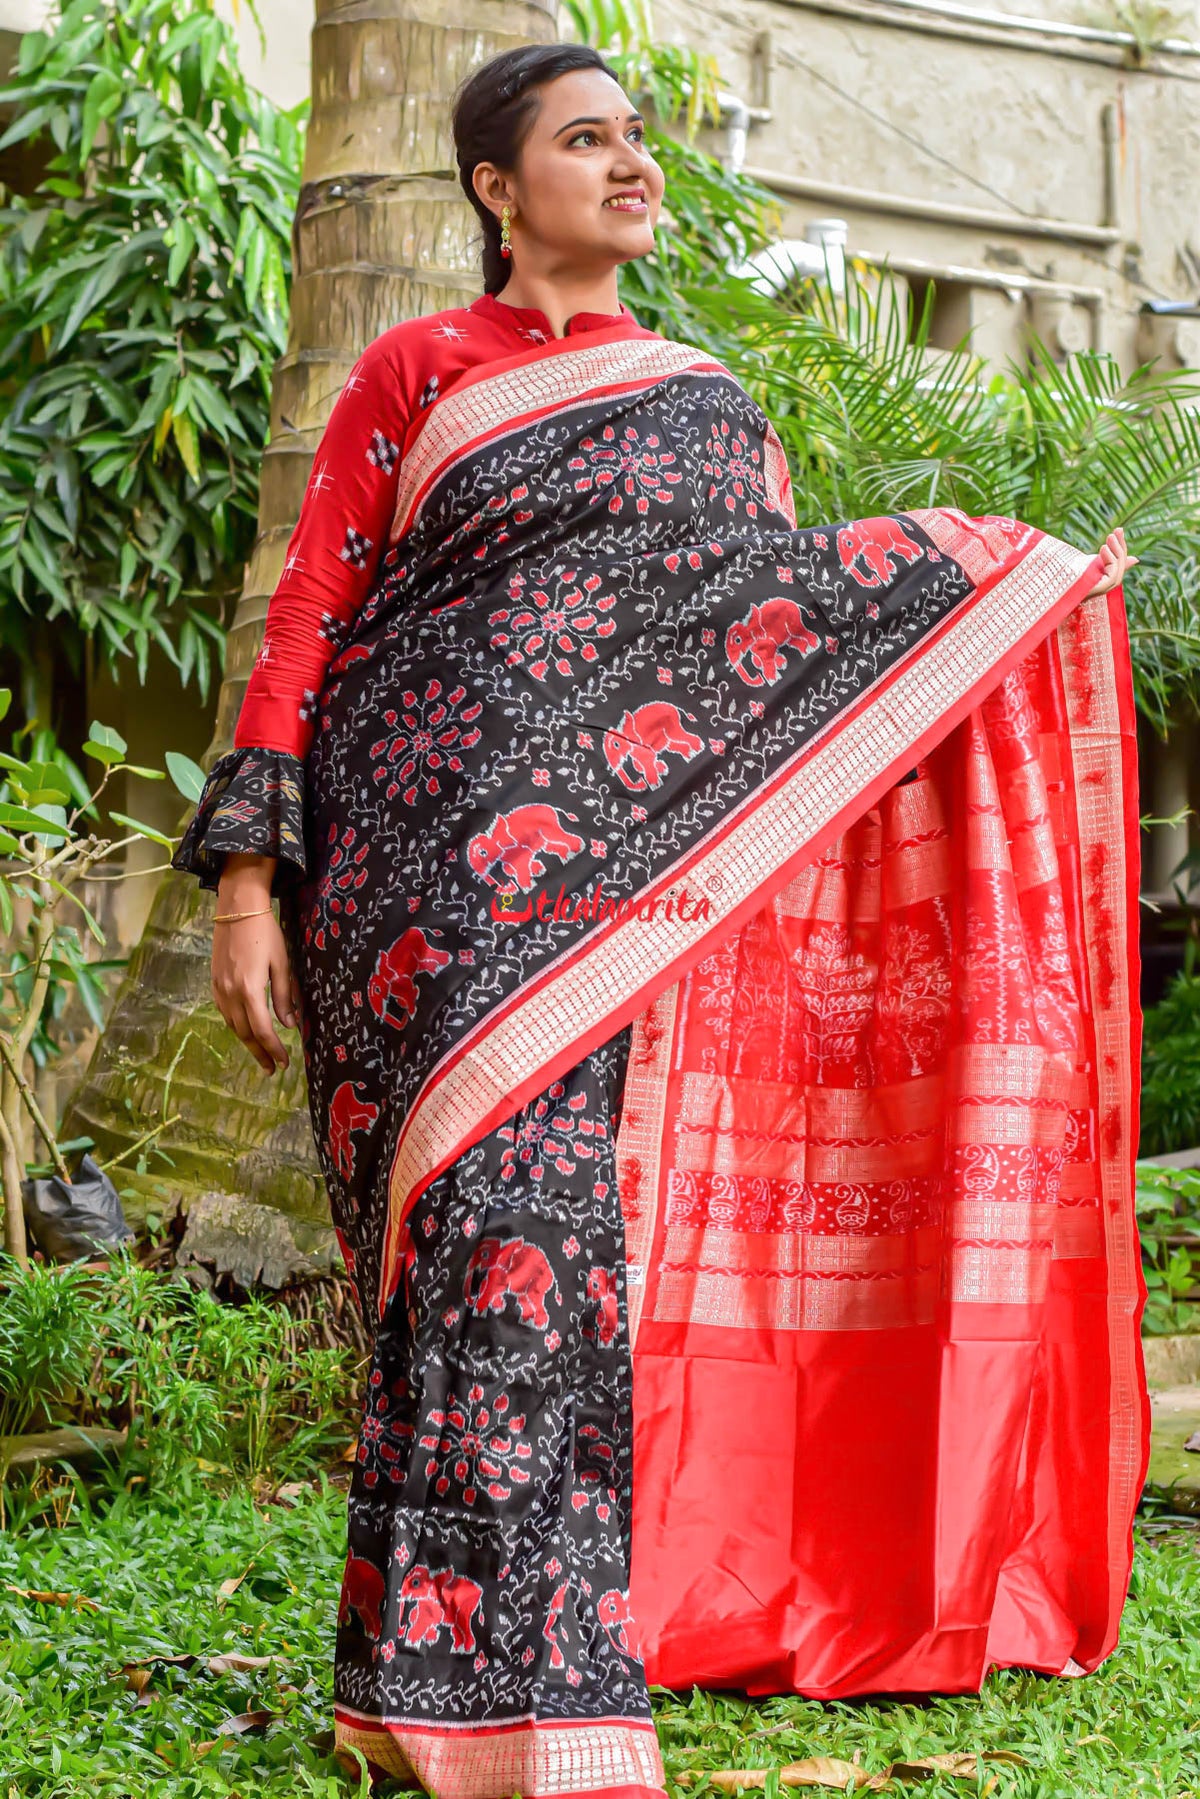 Falling in Love with Sambalpuri Sarees: My Journey to Building a Collection  - Sanskriti Cuttack